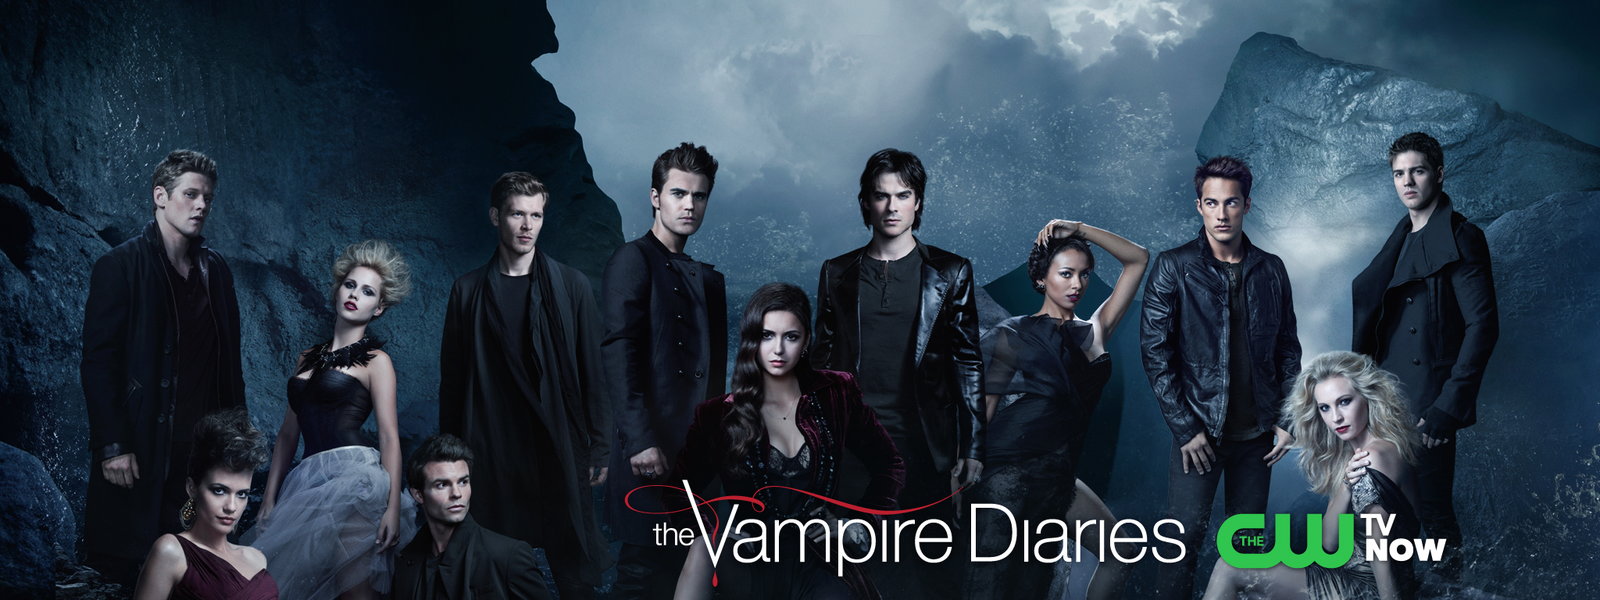 Vampire Diaries Whole Cast Wallpaper Like The